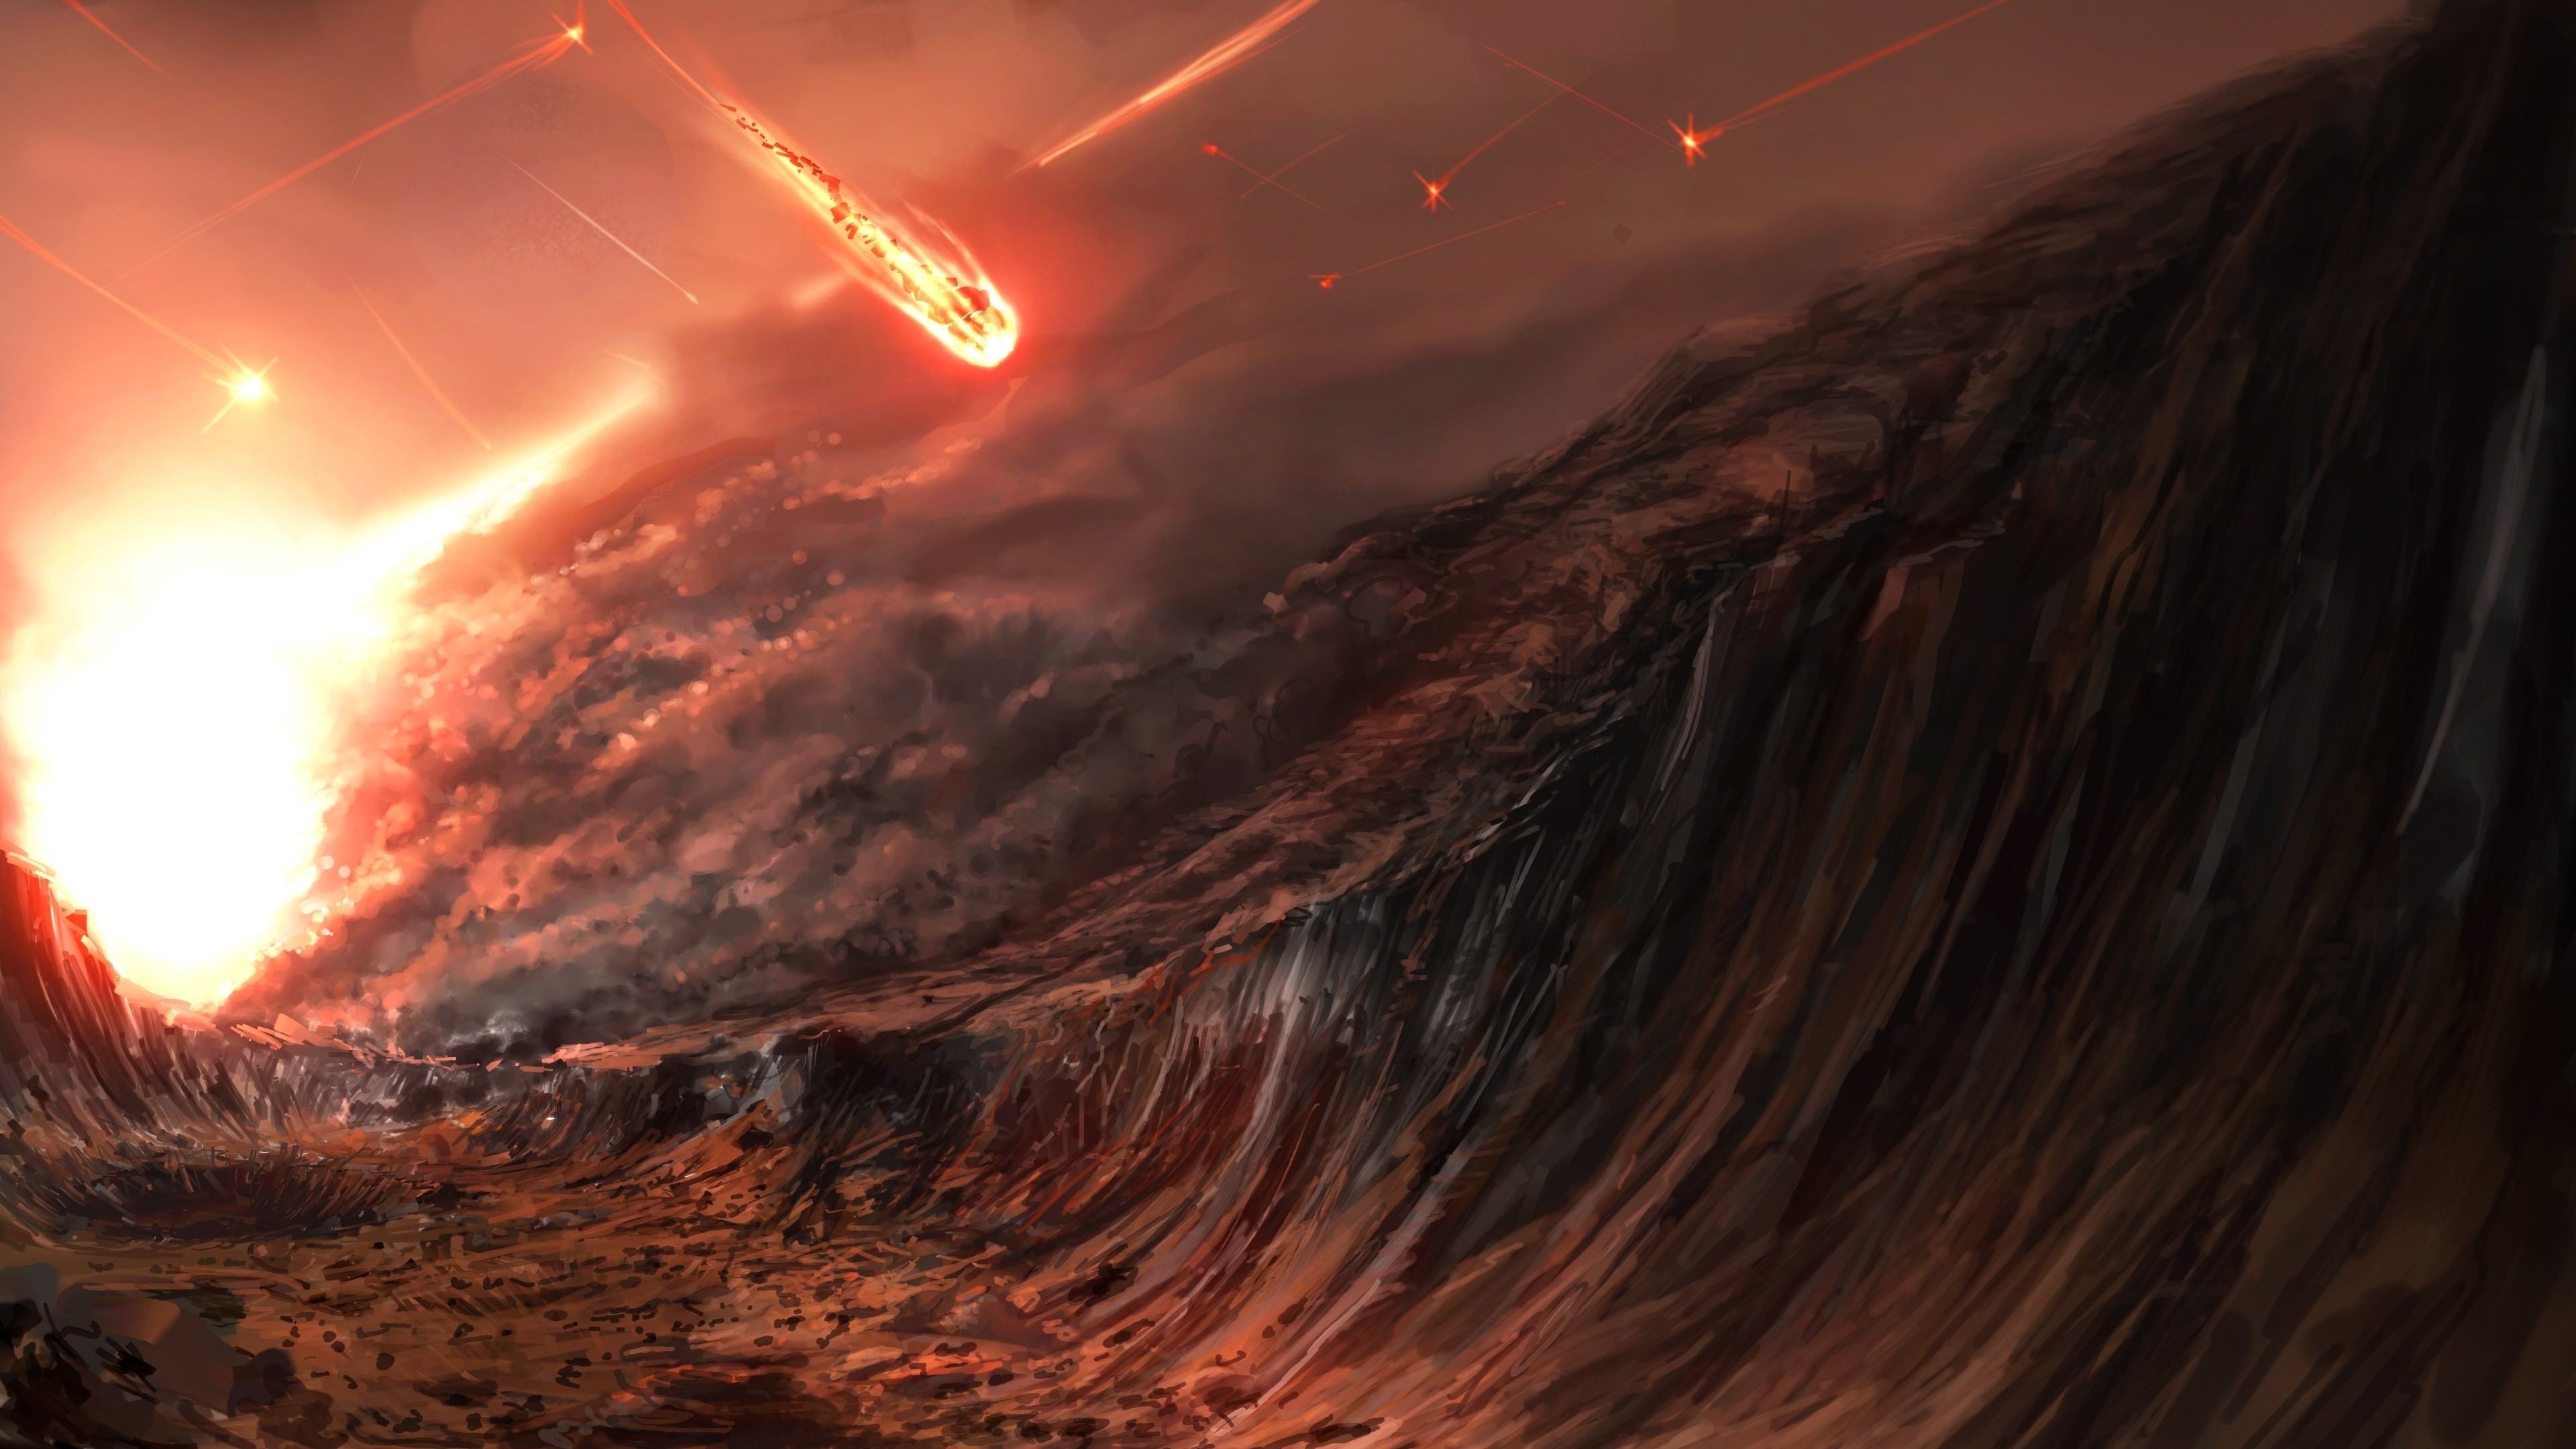 3840x2160 apocalyptic backgrounds for desktop hd backgrounds - apocalyptic category